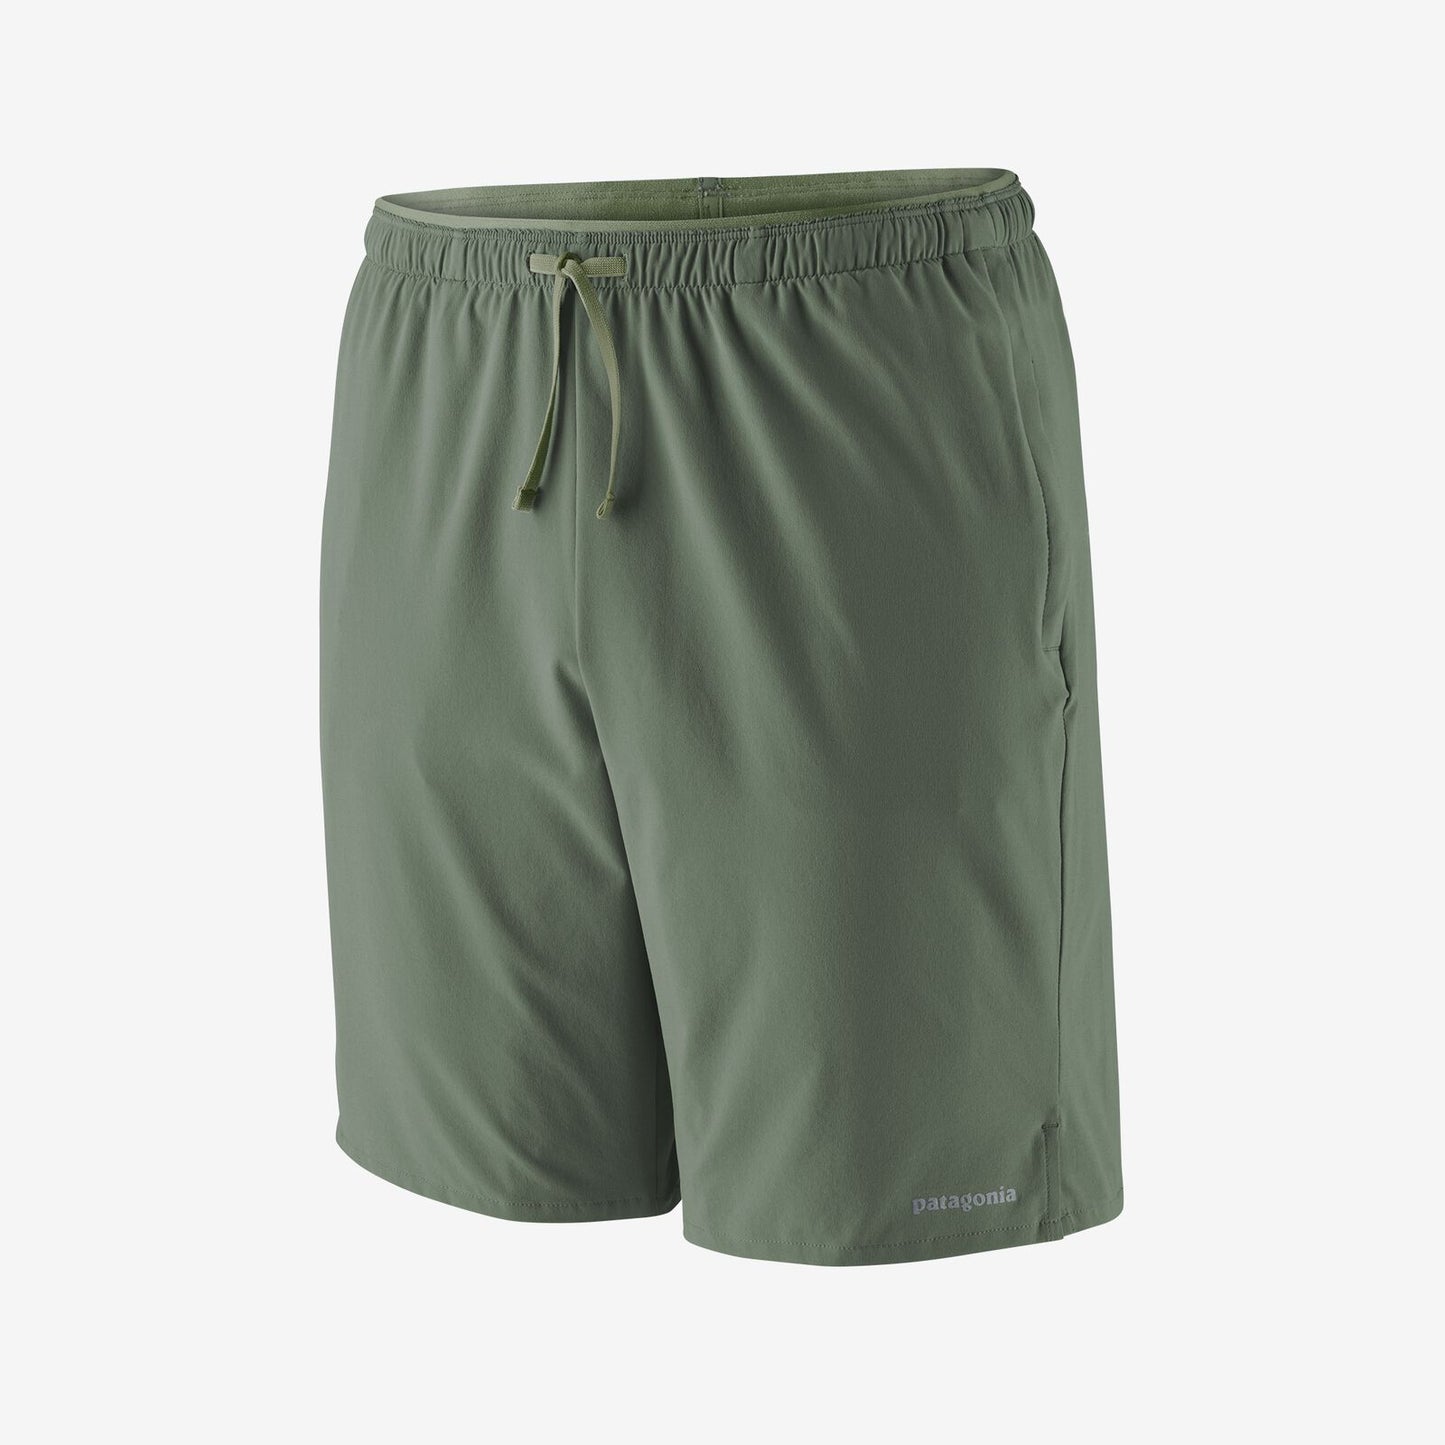 Patagonia Mens Multi Trails Shorts with 8 Inch Inseam in Hemlock Green